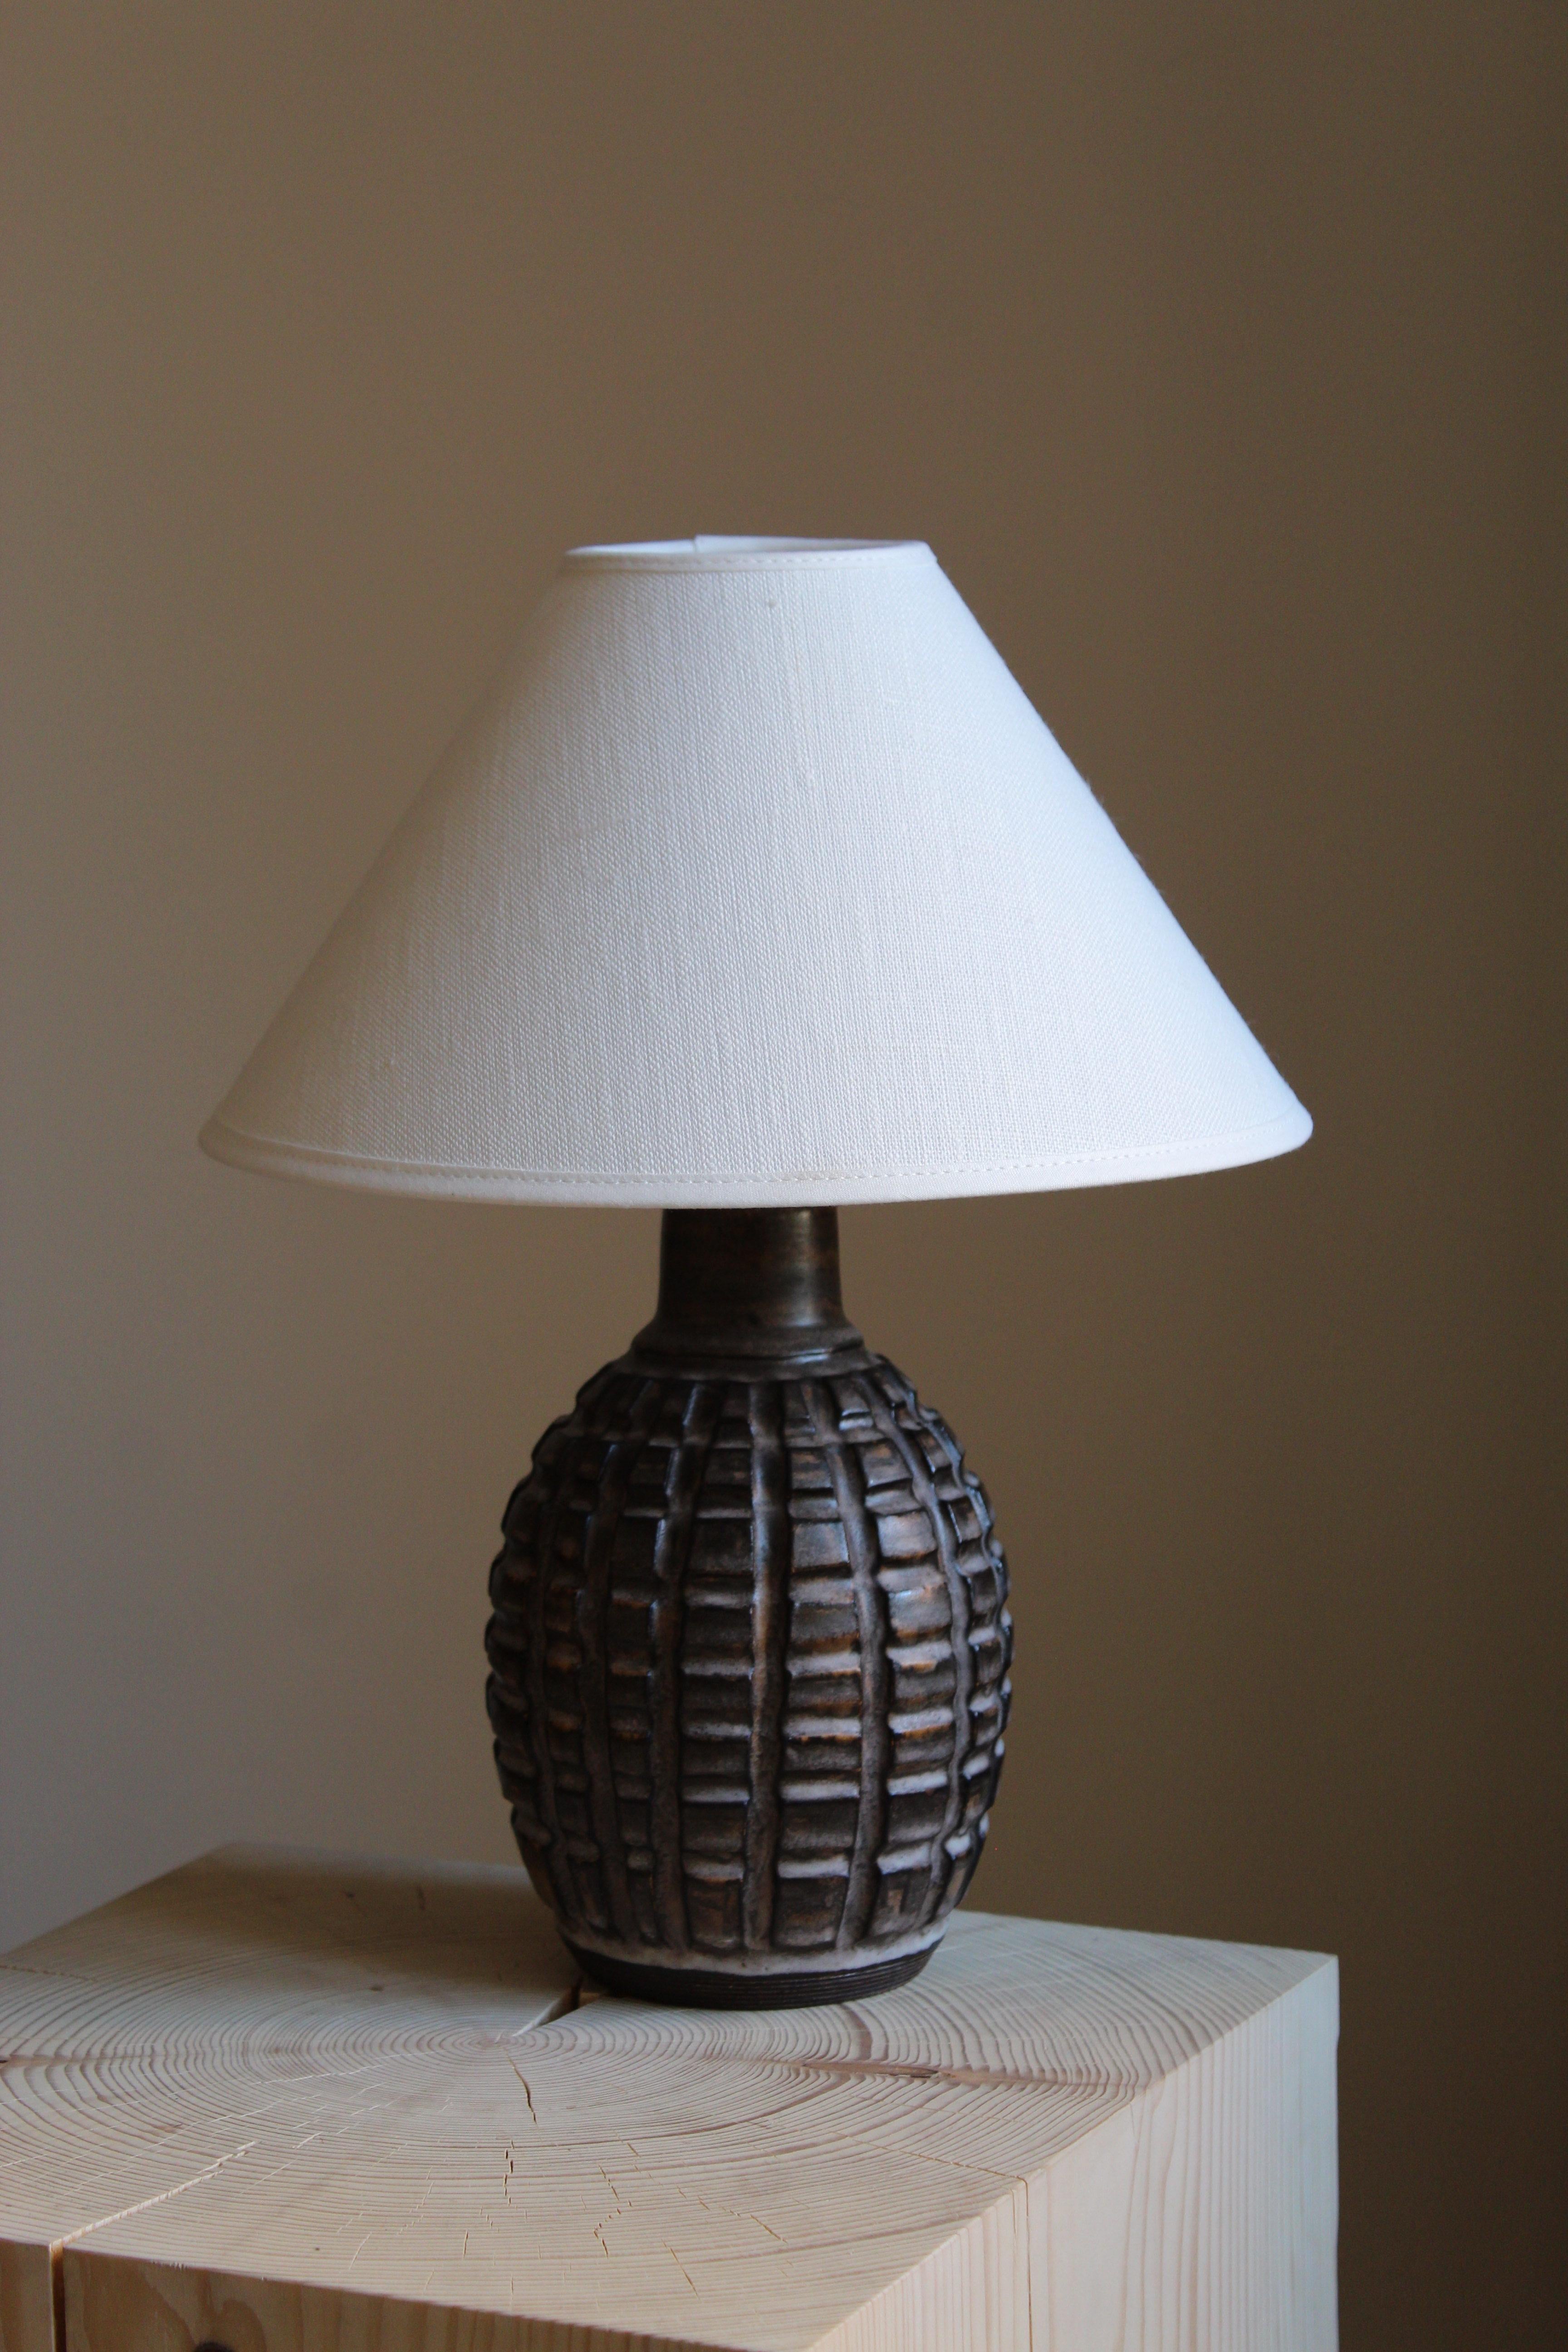 A table lamp by ceramic artist and designer Irma Youstone. Designed and produced in artists' own studio. Sweden, c. 1960s. Sold without lampshade.